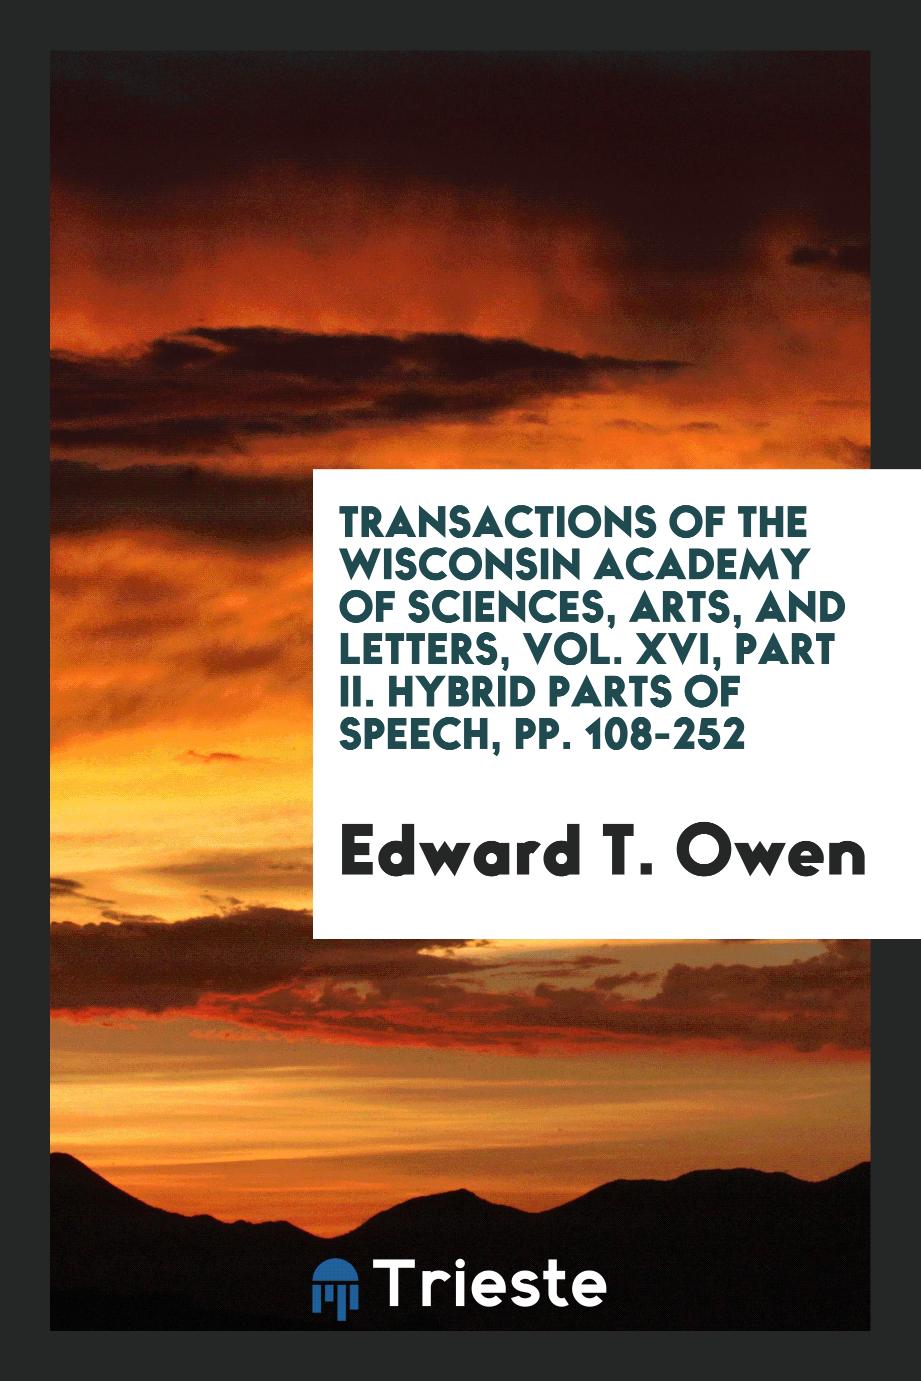 Transactions of the Wisconsin Academy of Sciences, Arts, and Letters, Vol. XVI, Part II. Hybrid Parts of Speech, pp. 108-252